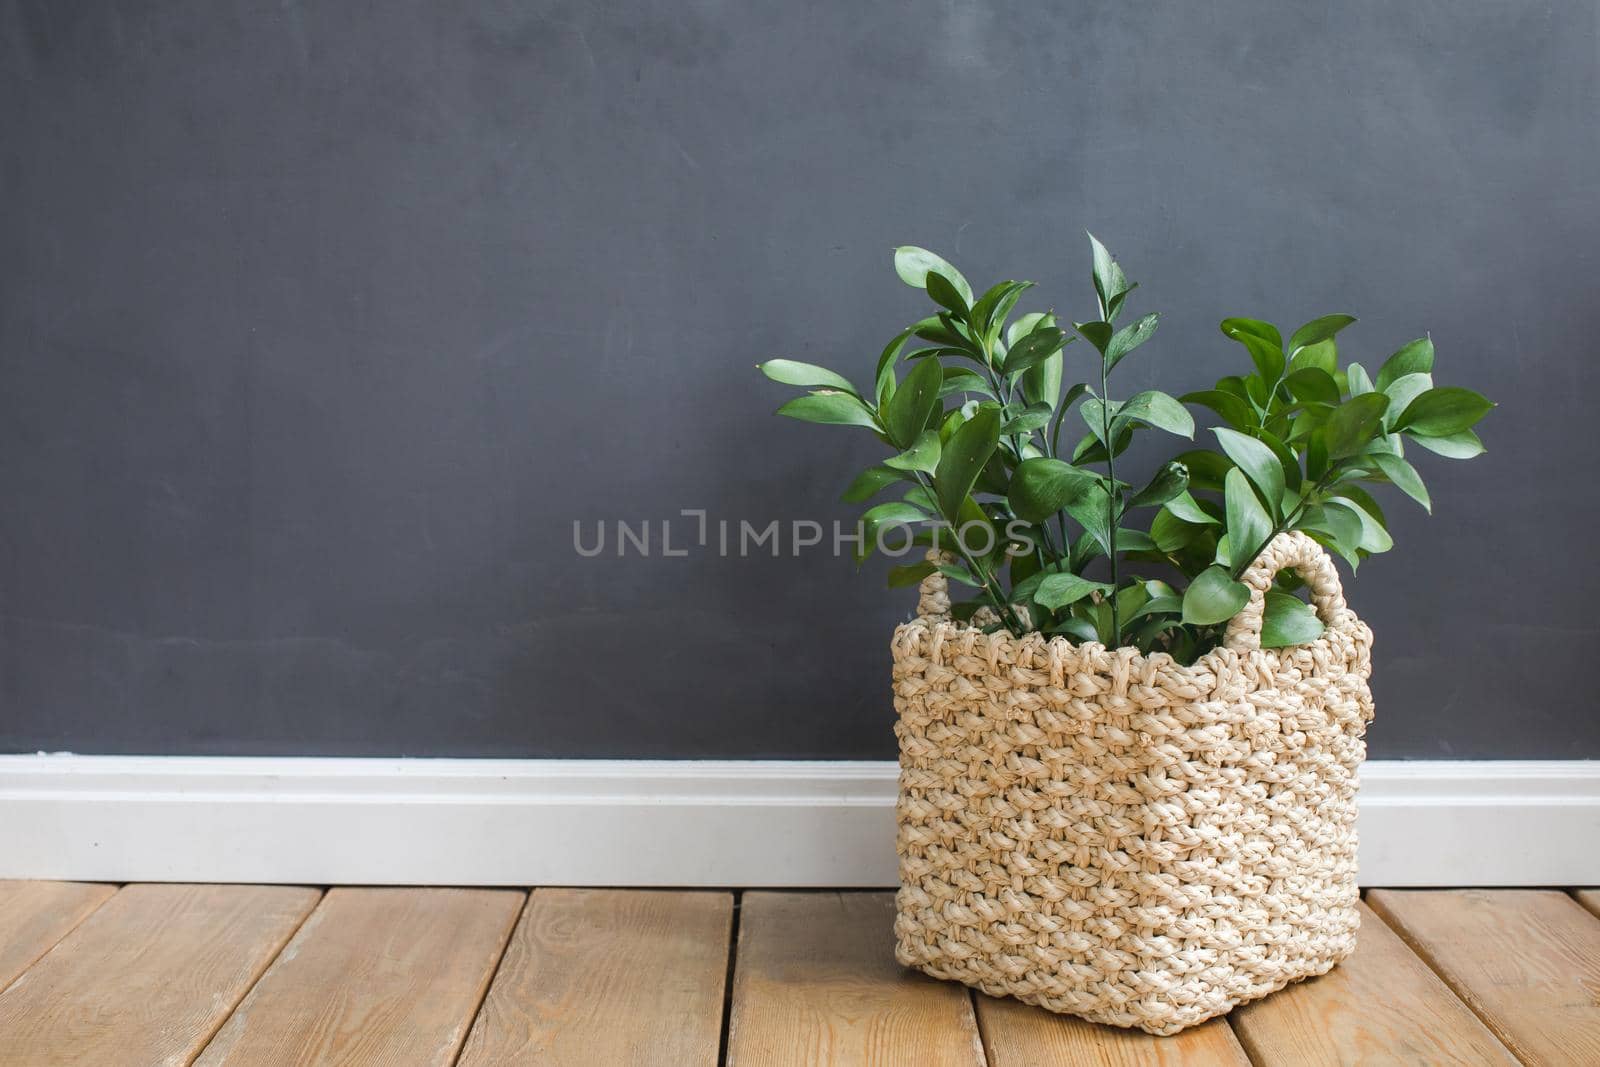 Plant in a tub against a gray wall on a wooden floor